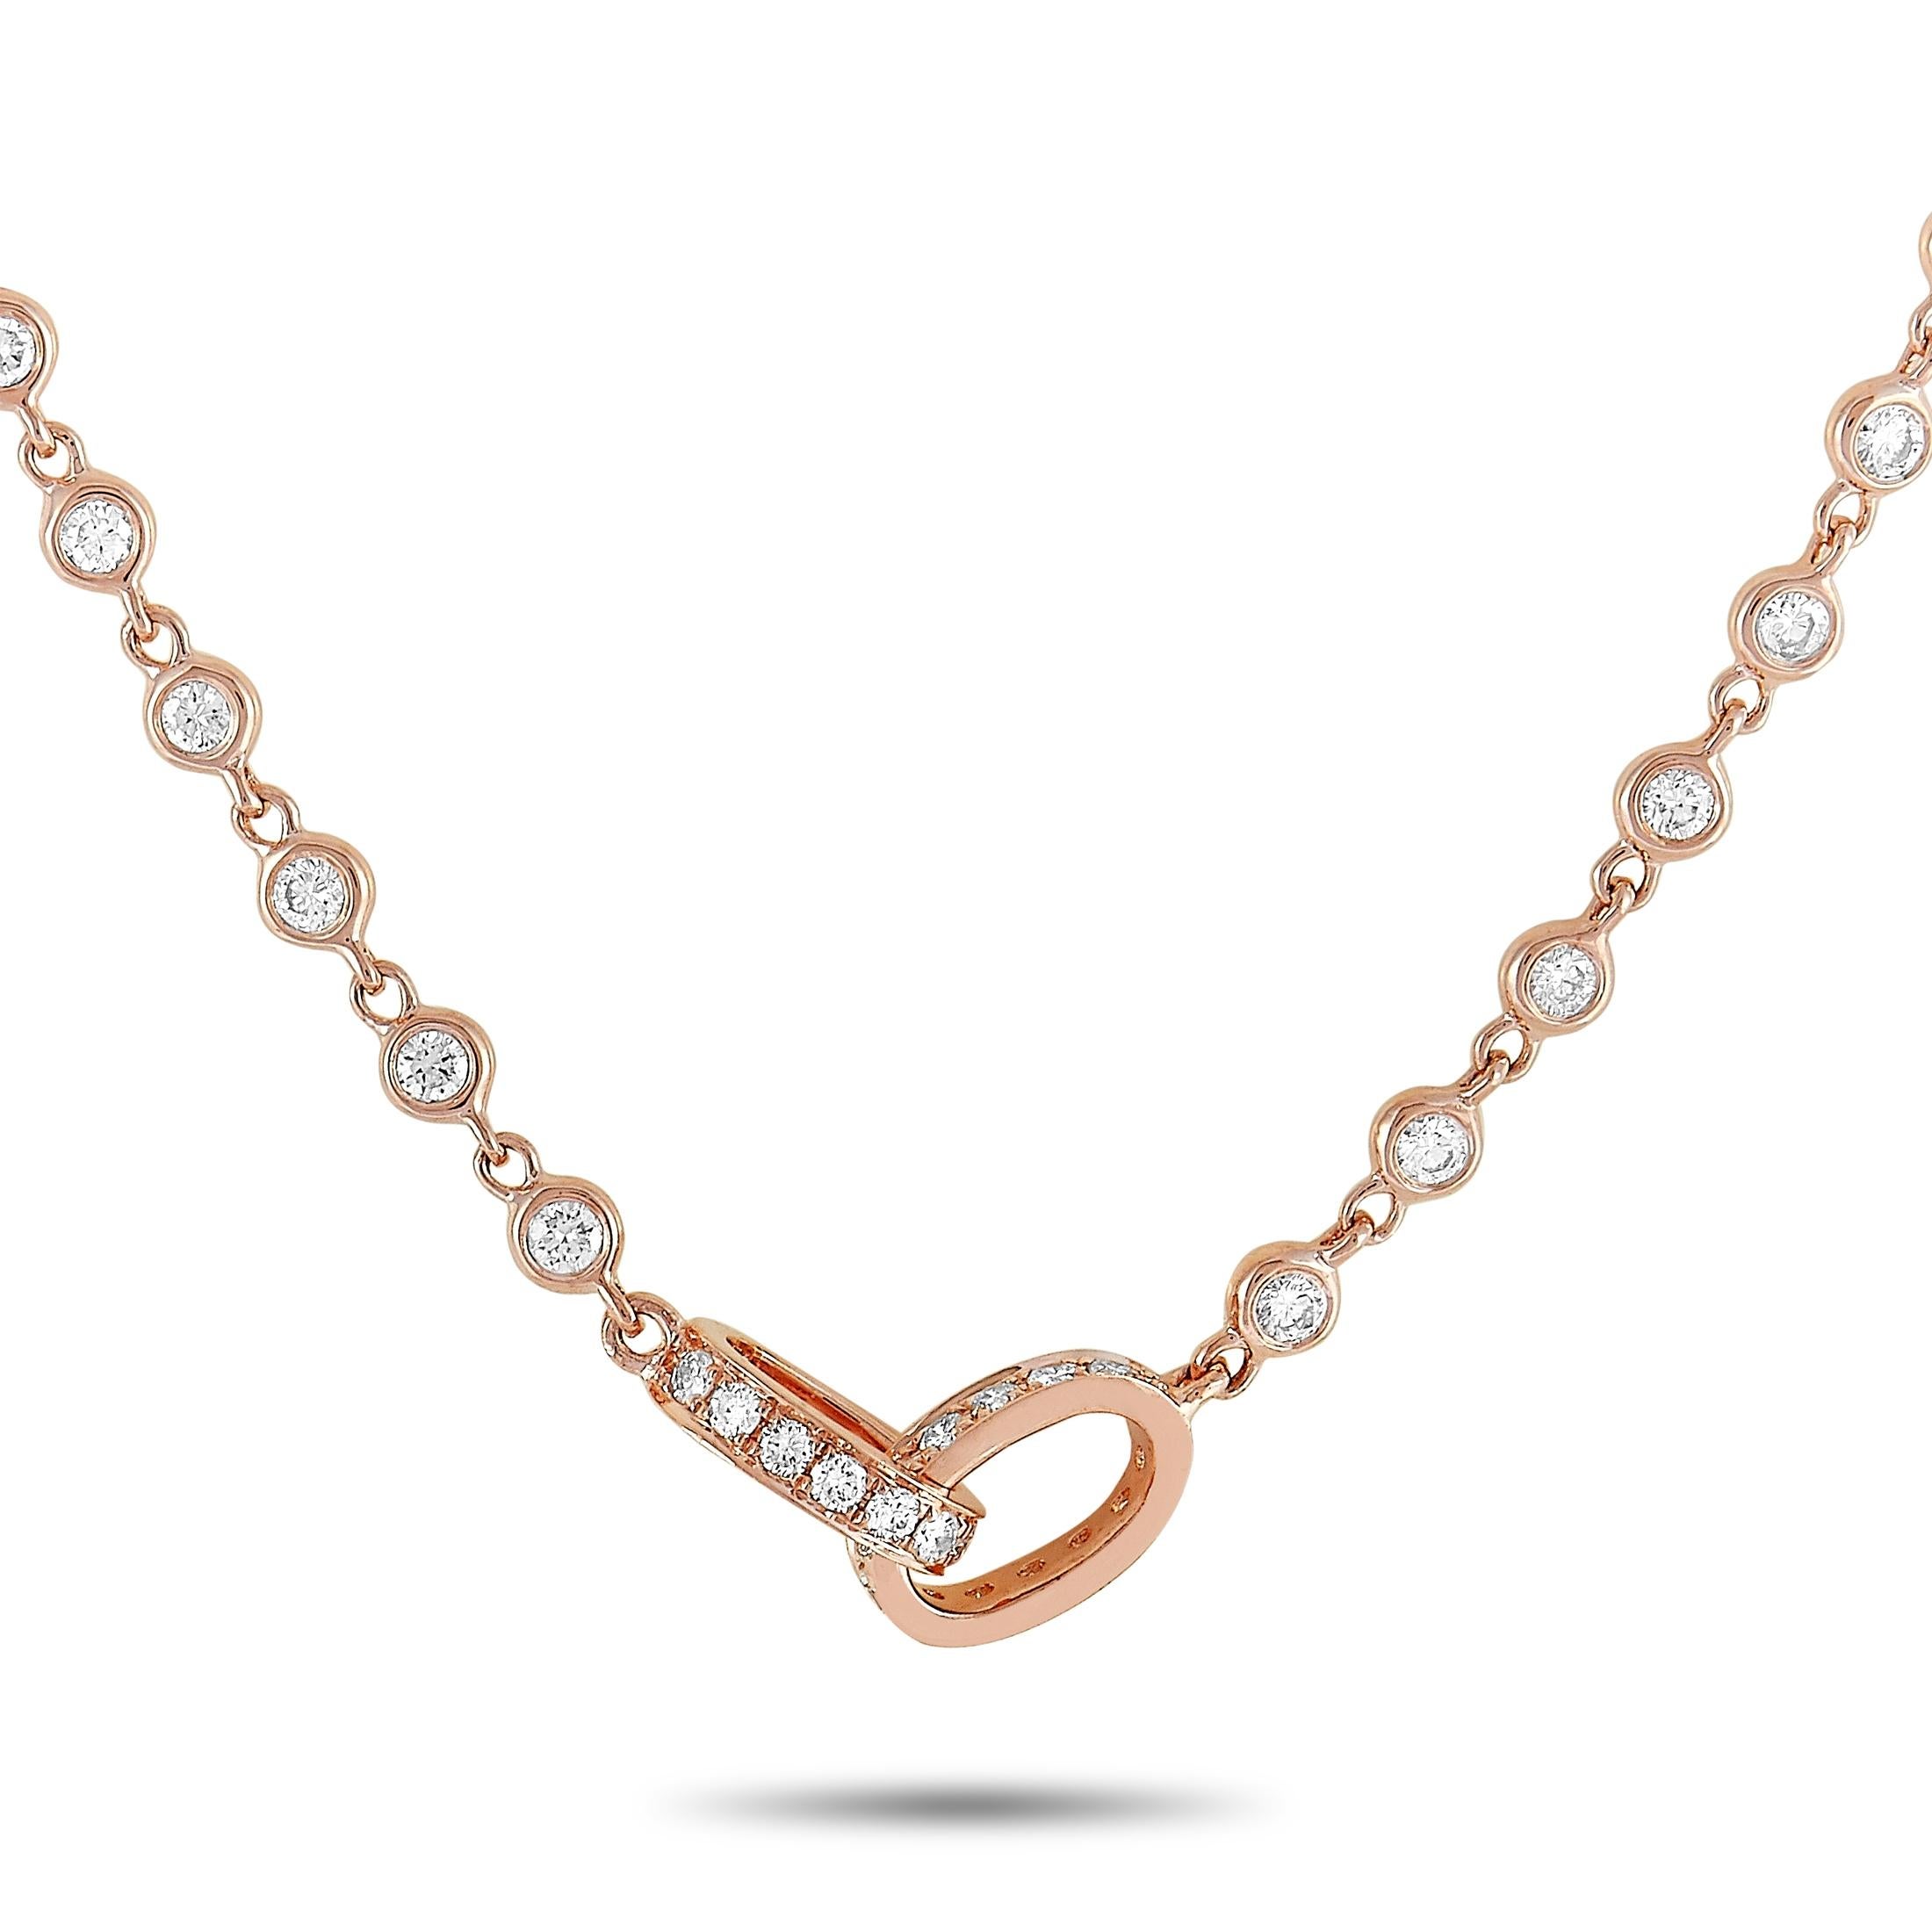 This LB Exclusive necklace is made out of 18K rose gold and diamonds that amount to 8.00 carats. The necklace weighs 29.8 grams and measures 44” in length.

Offered in brand new condition, this jewelry piece includes a gift box.